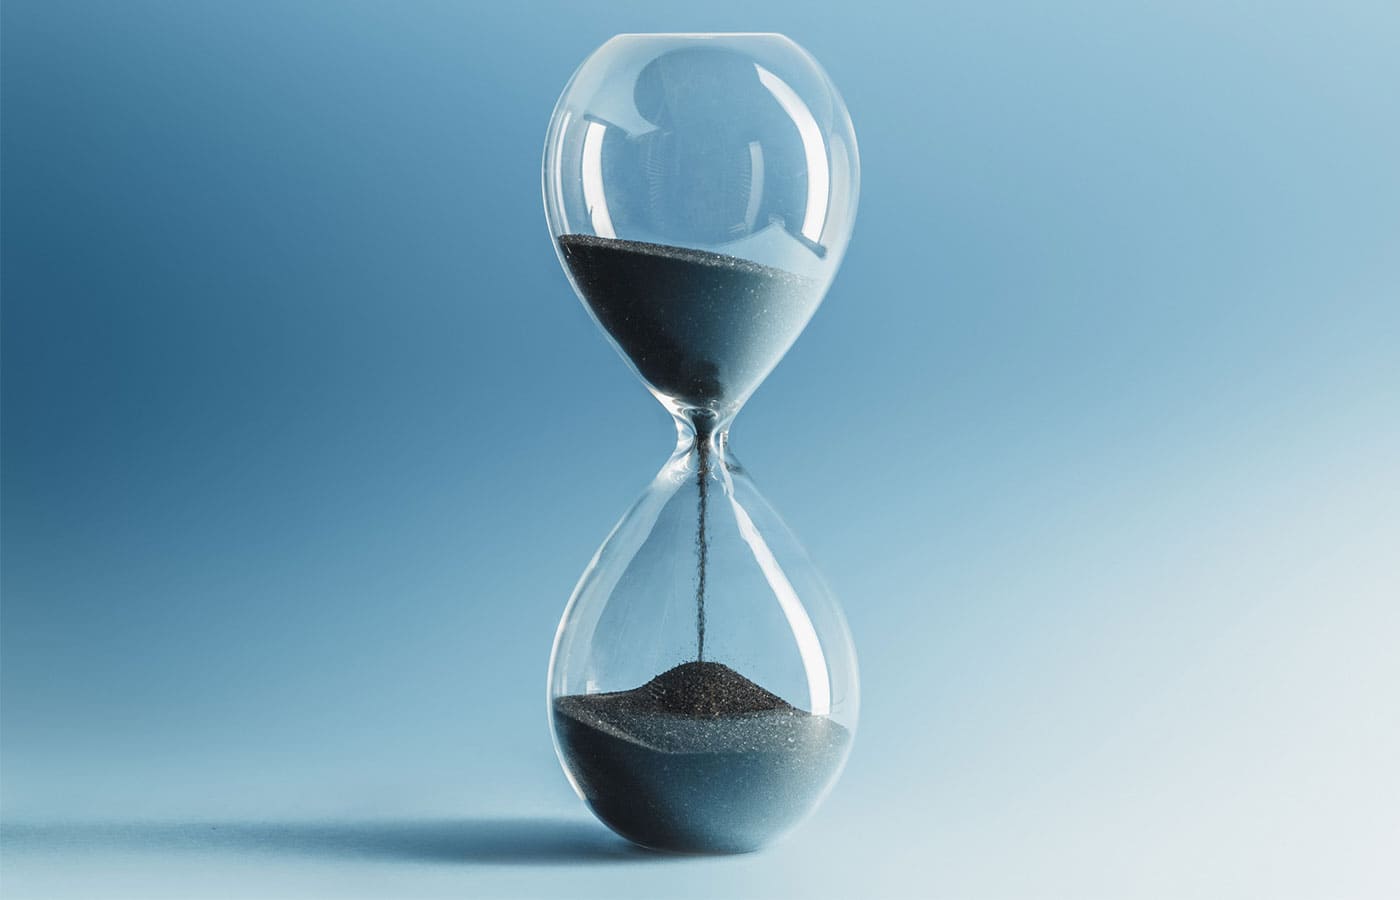 Hourglass showing that time is running out